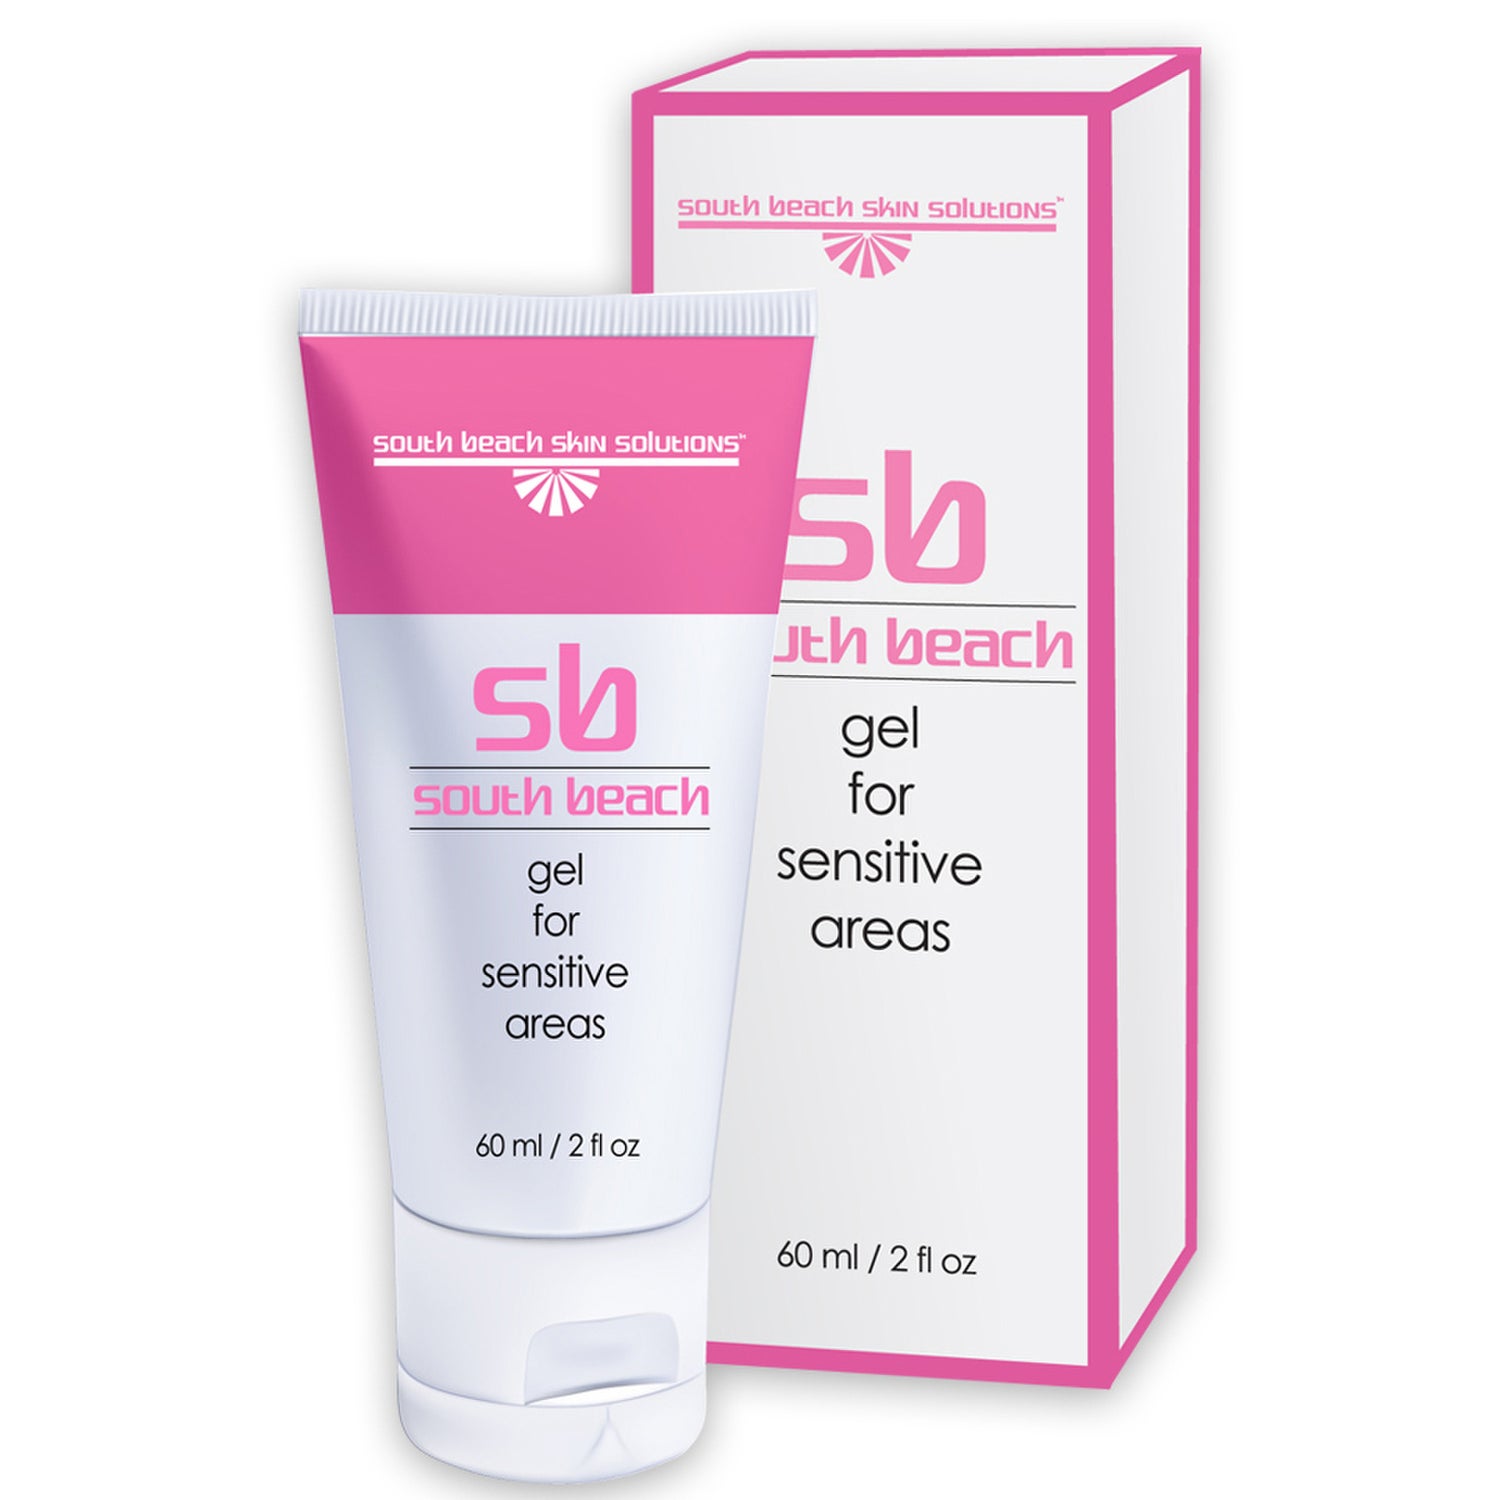 South Beach Skin Solutions Gel for Sensitive Areas SkinStore image